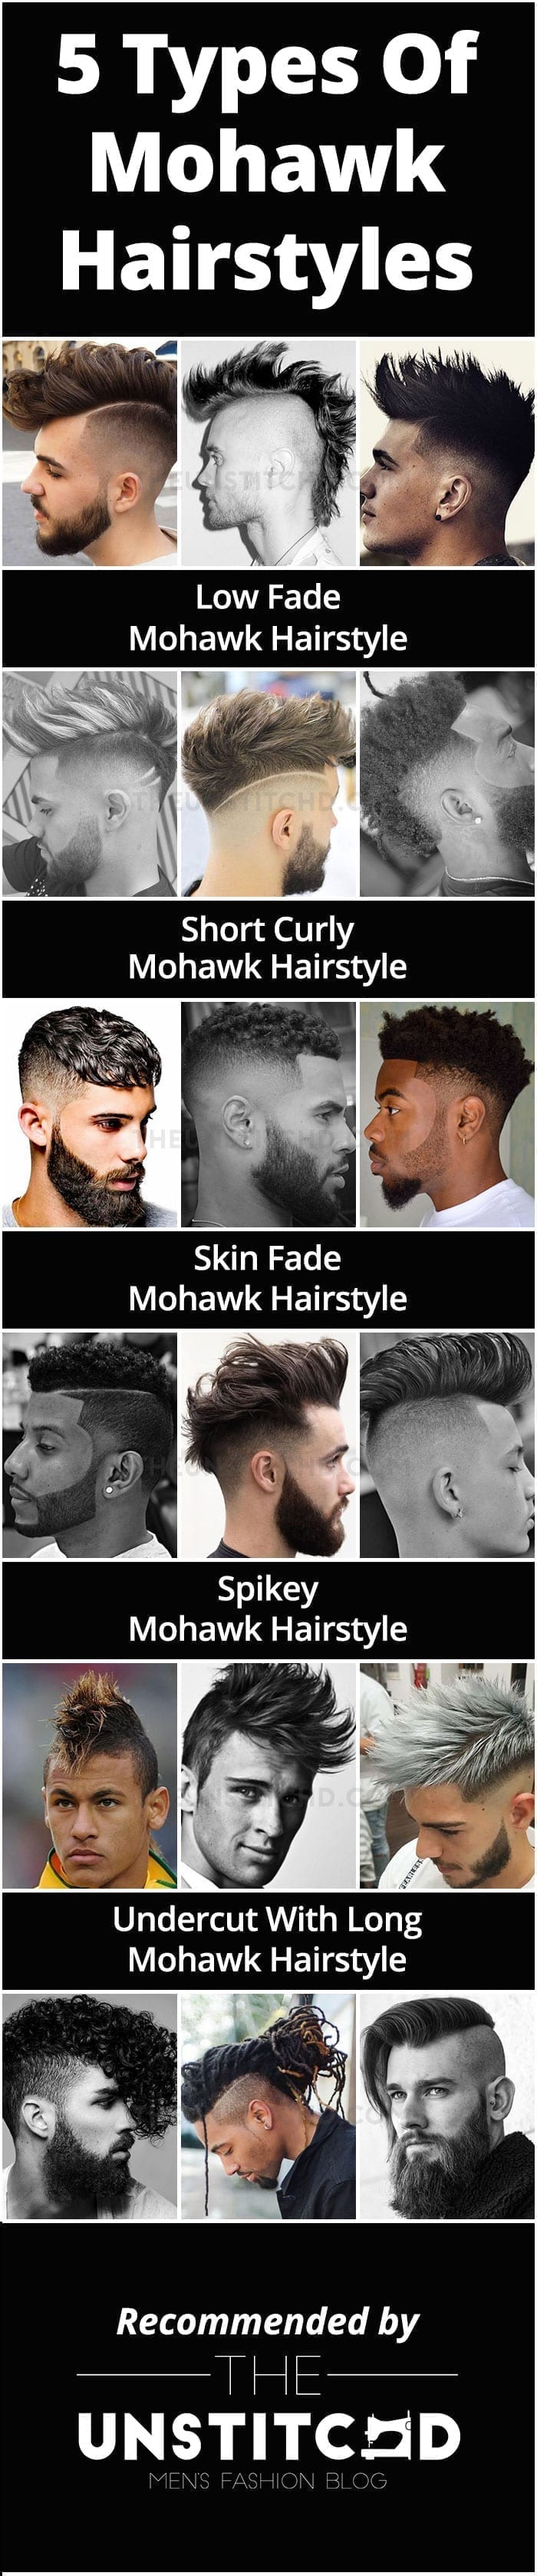 Mohawk-Hairstyle